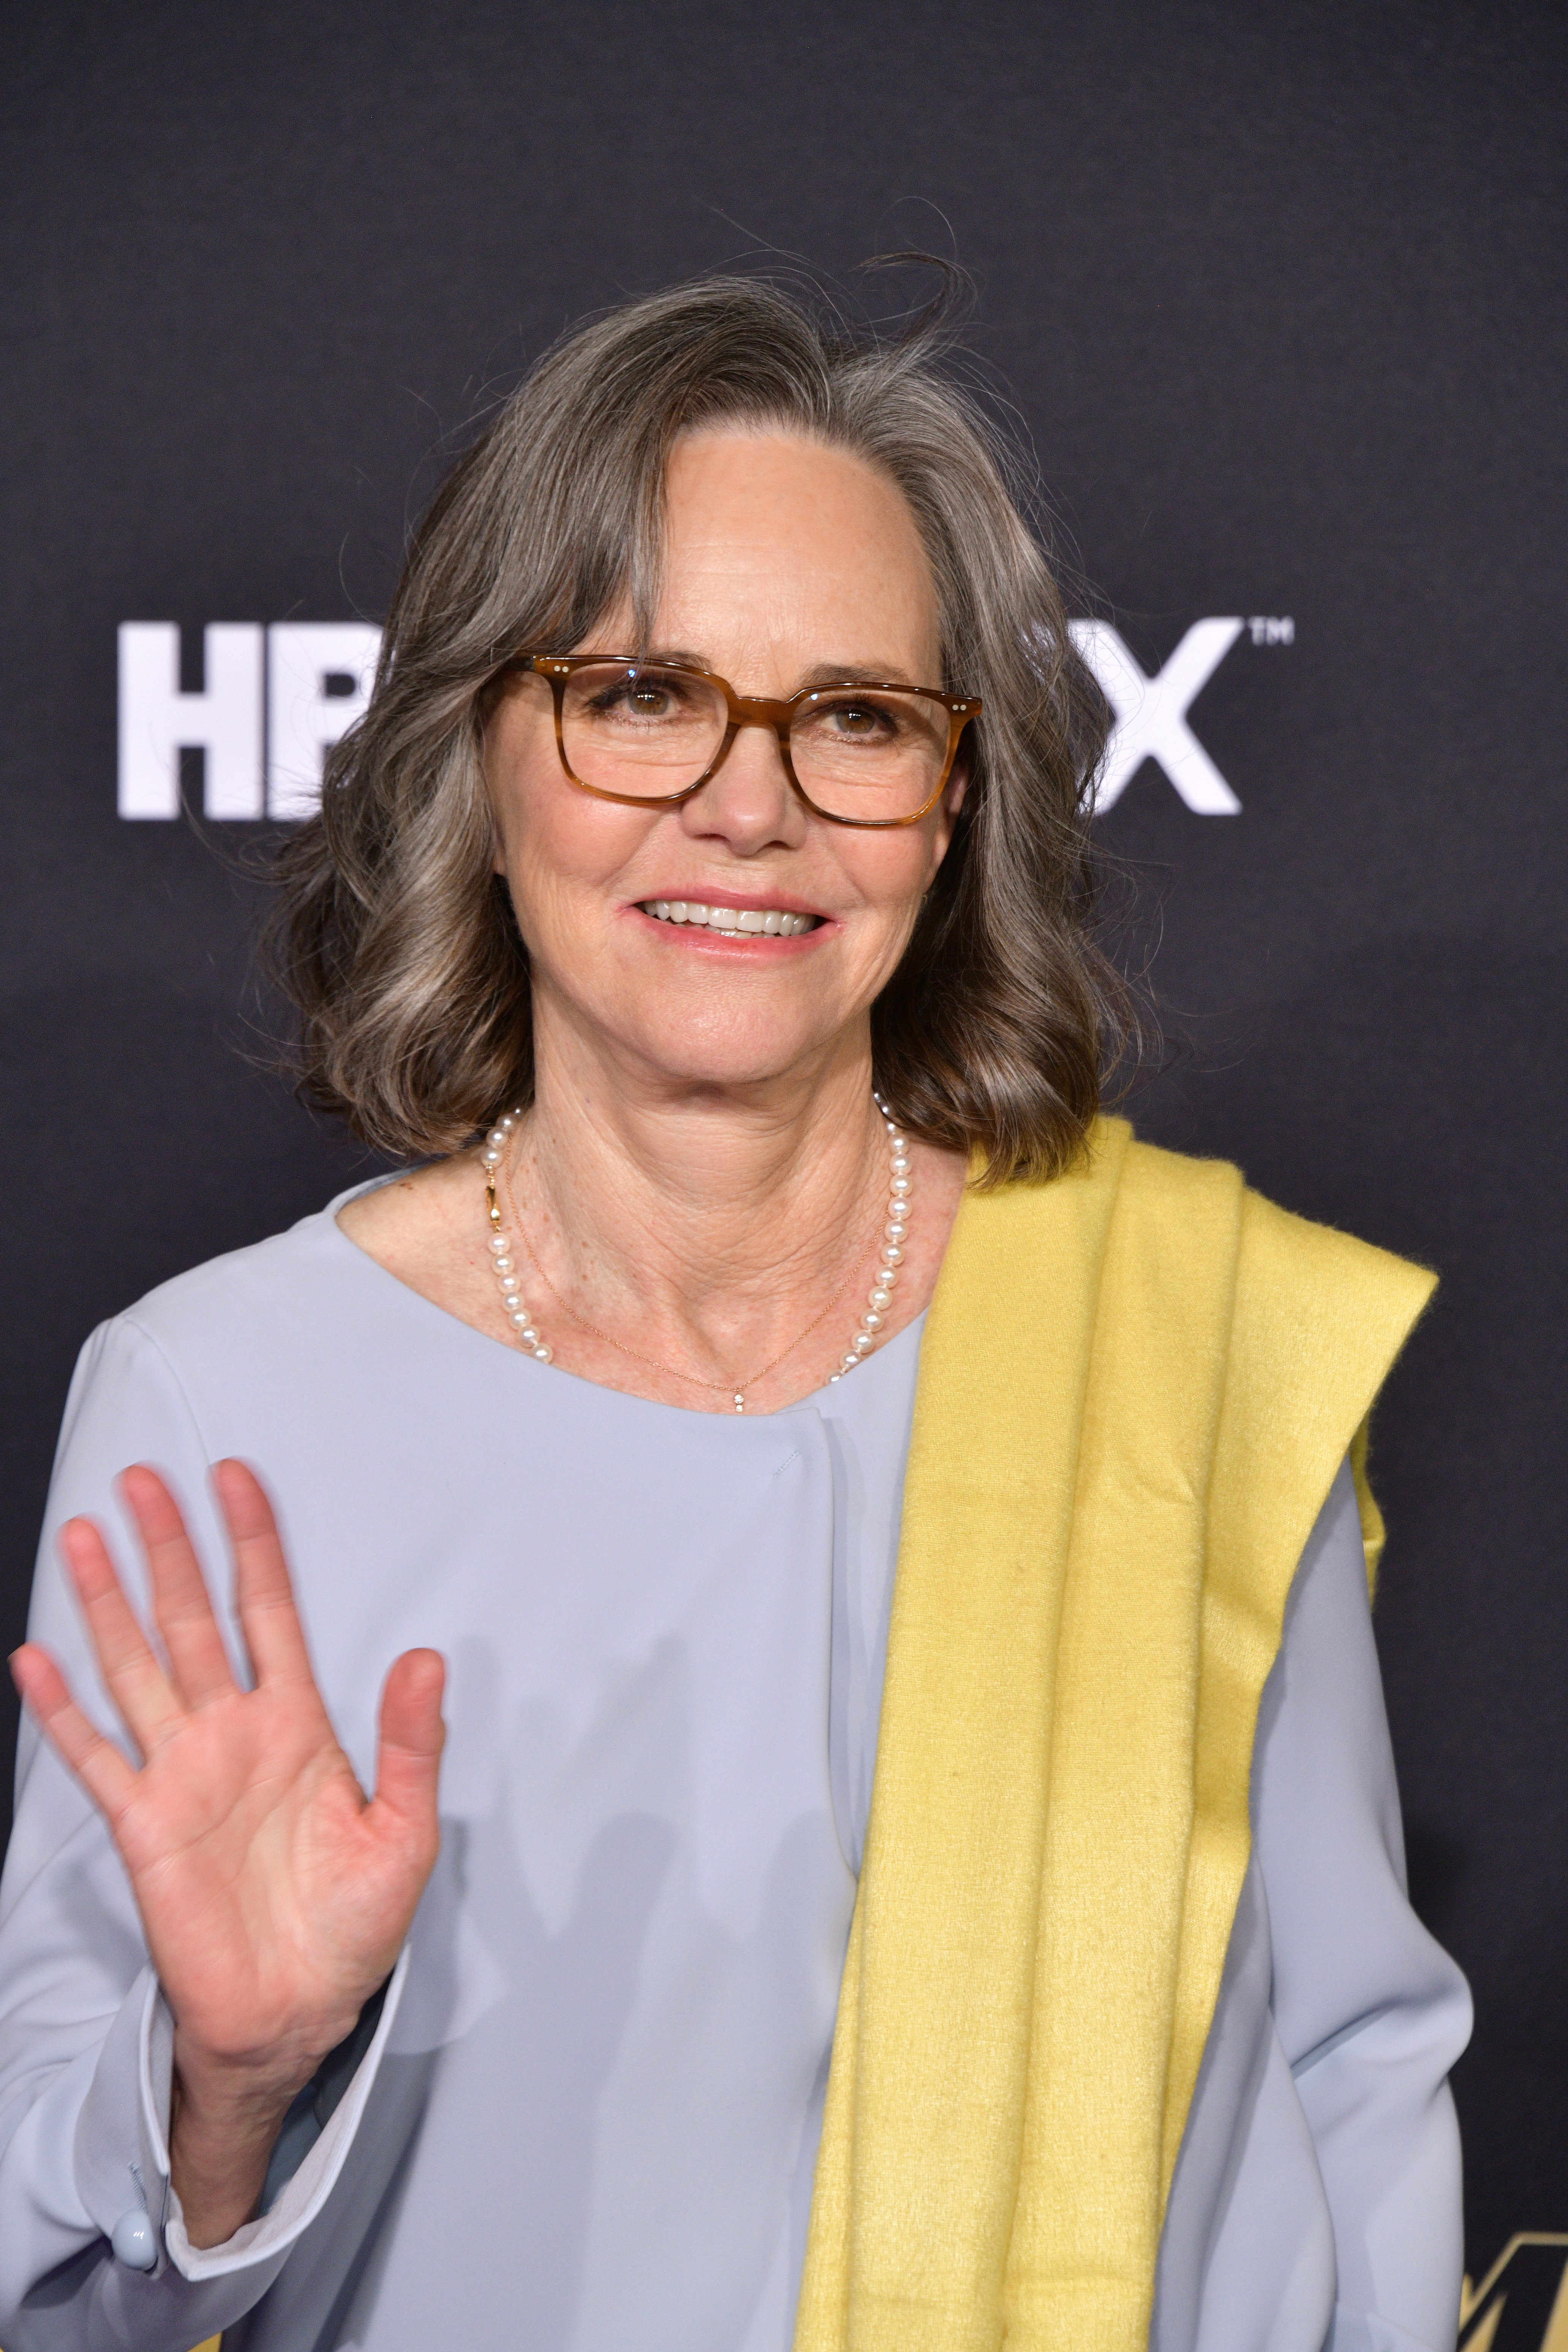 Sally Field at the premiere of HBO's "Winning Time: The Rise Of The Lakers Dynasty" at The Theatre at Ace Hotel on March 02, 2022, in Los Angeles, California. | Source: Getty Images